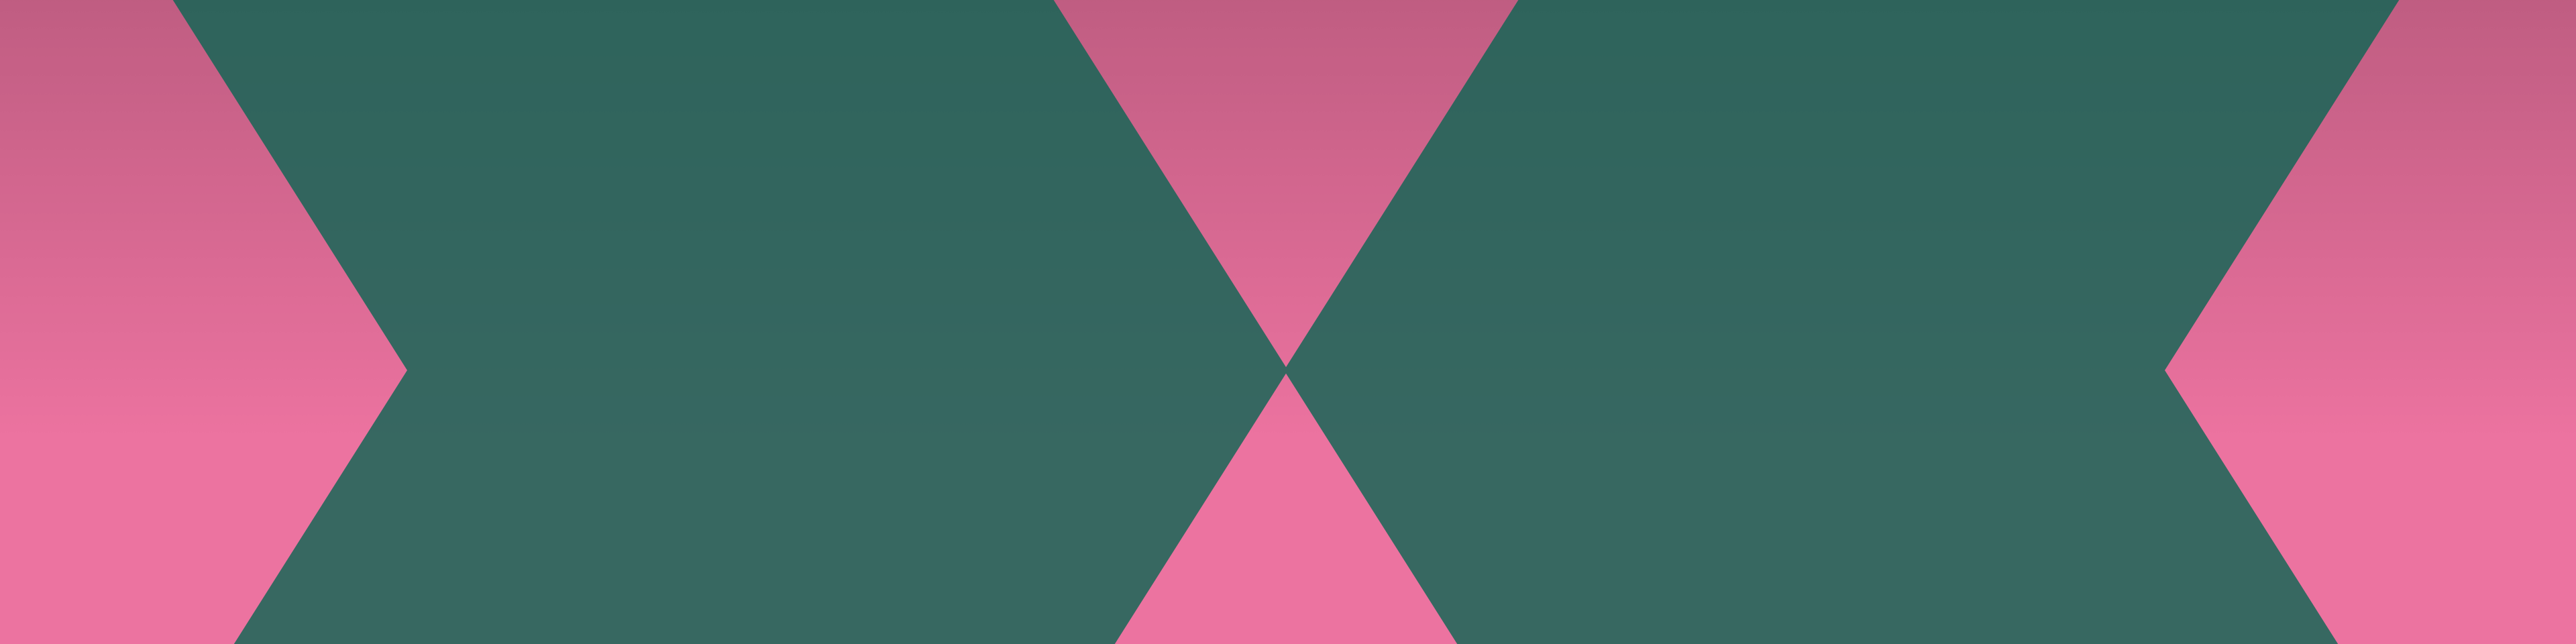 Pink header with a green double chevron on top.